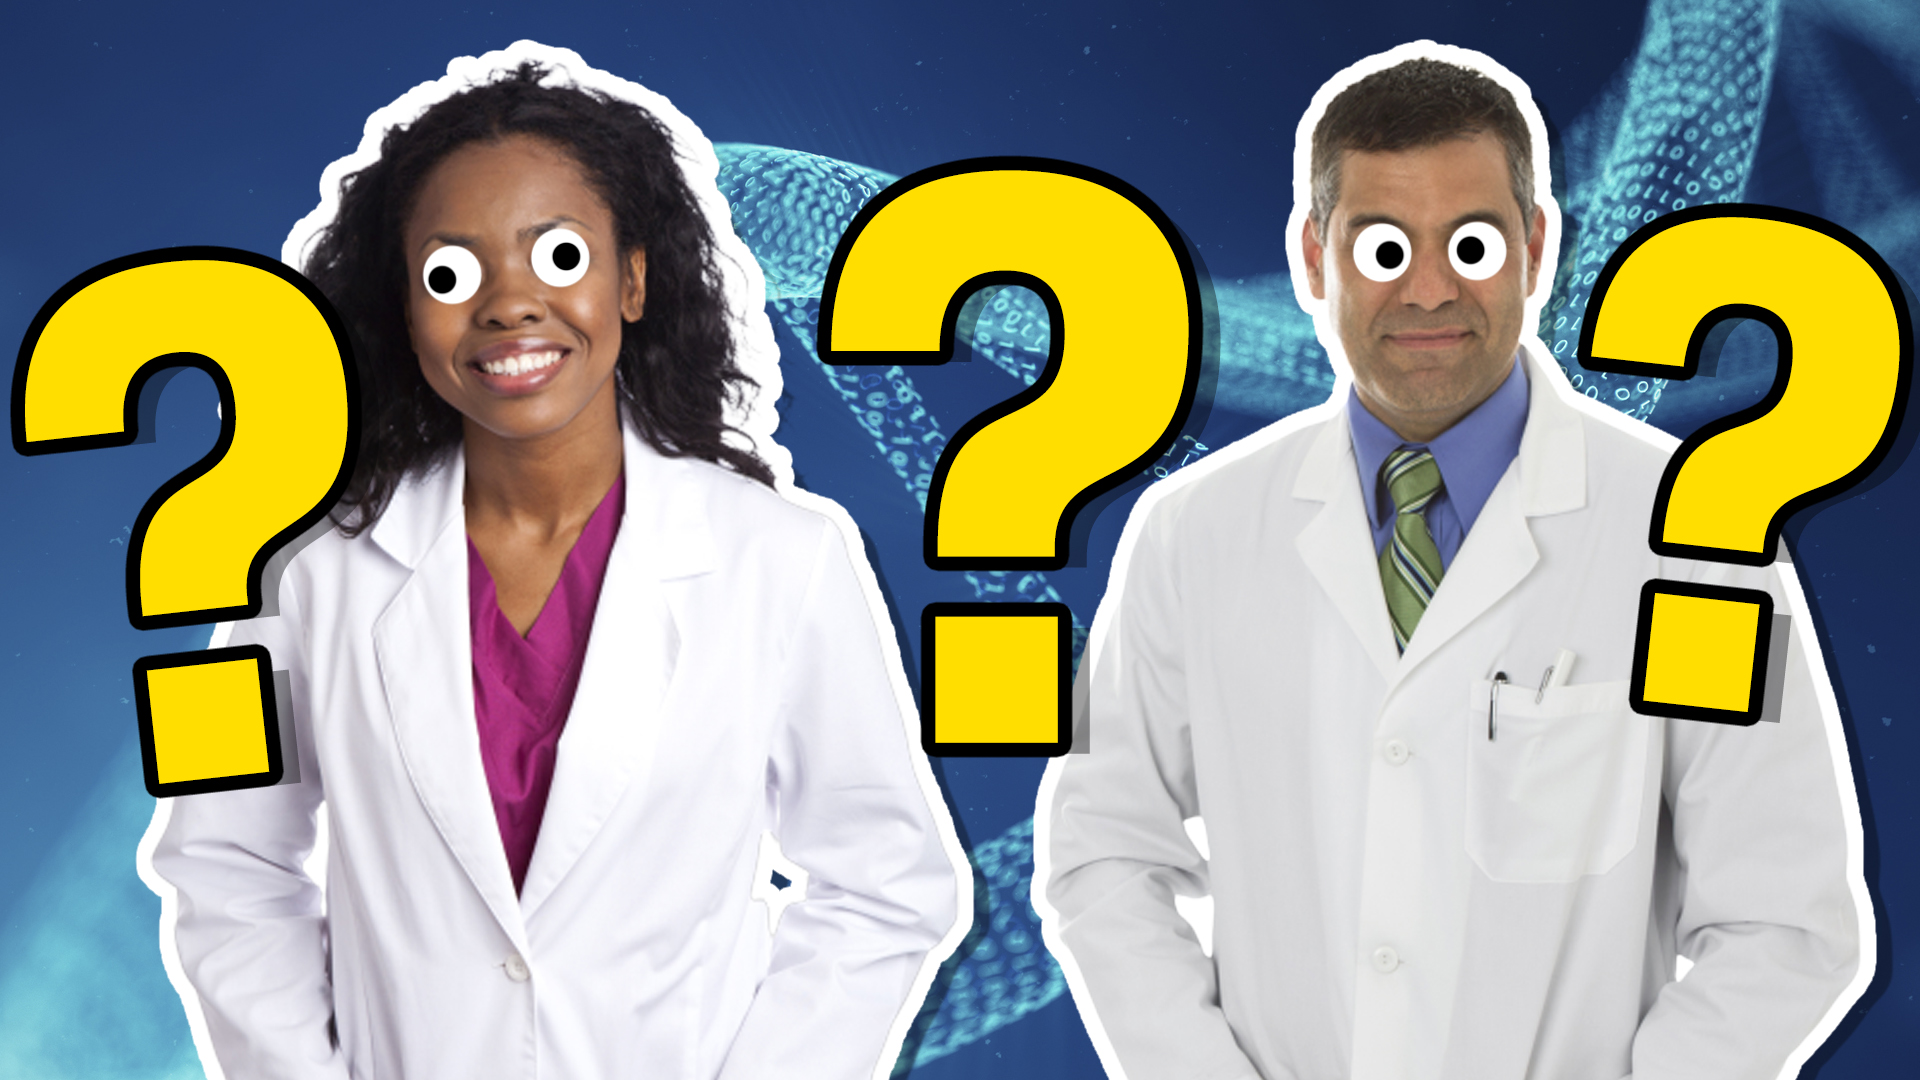 Two scientists will guess your age?